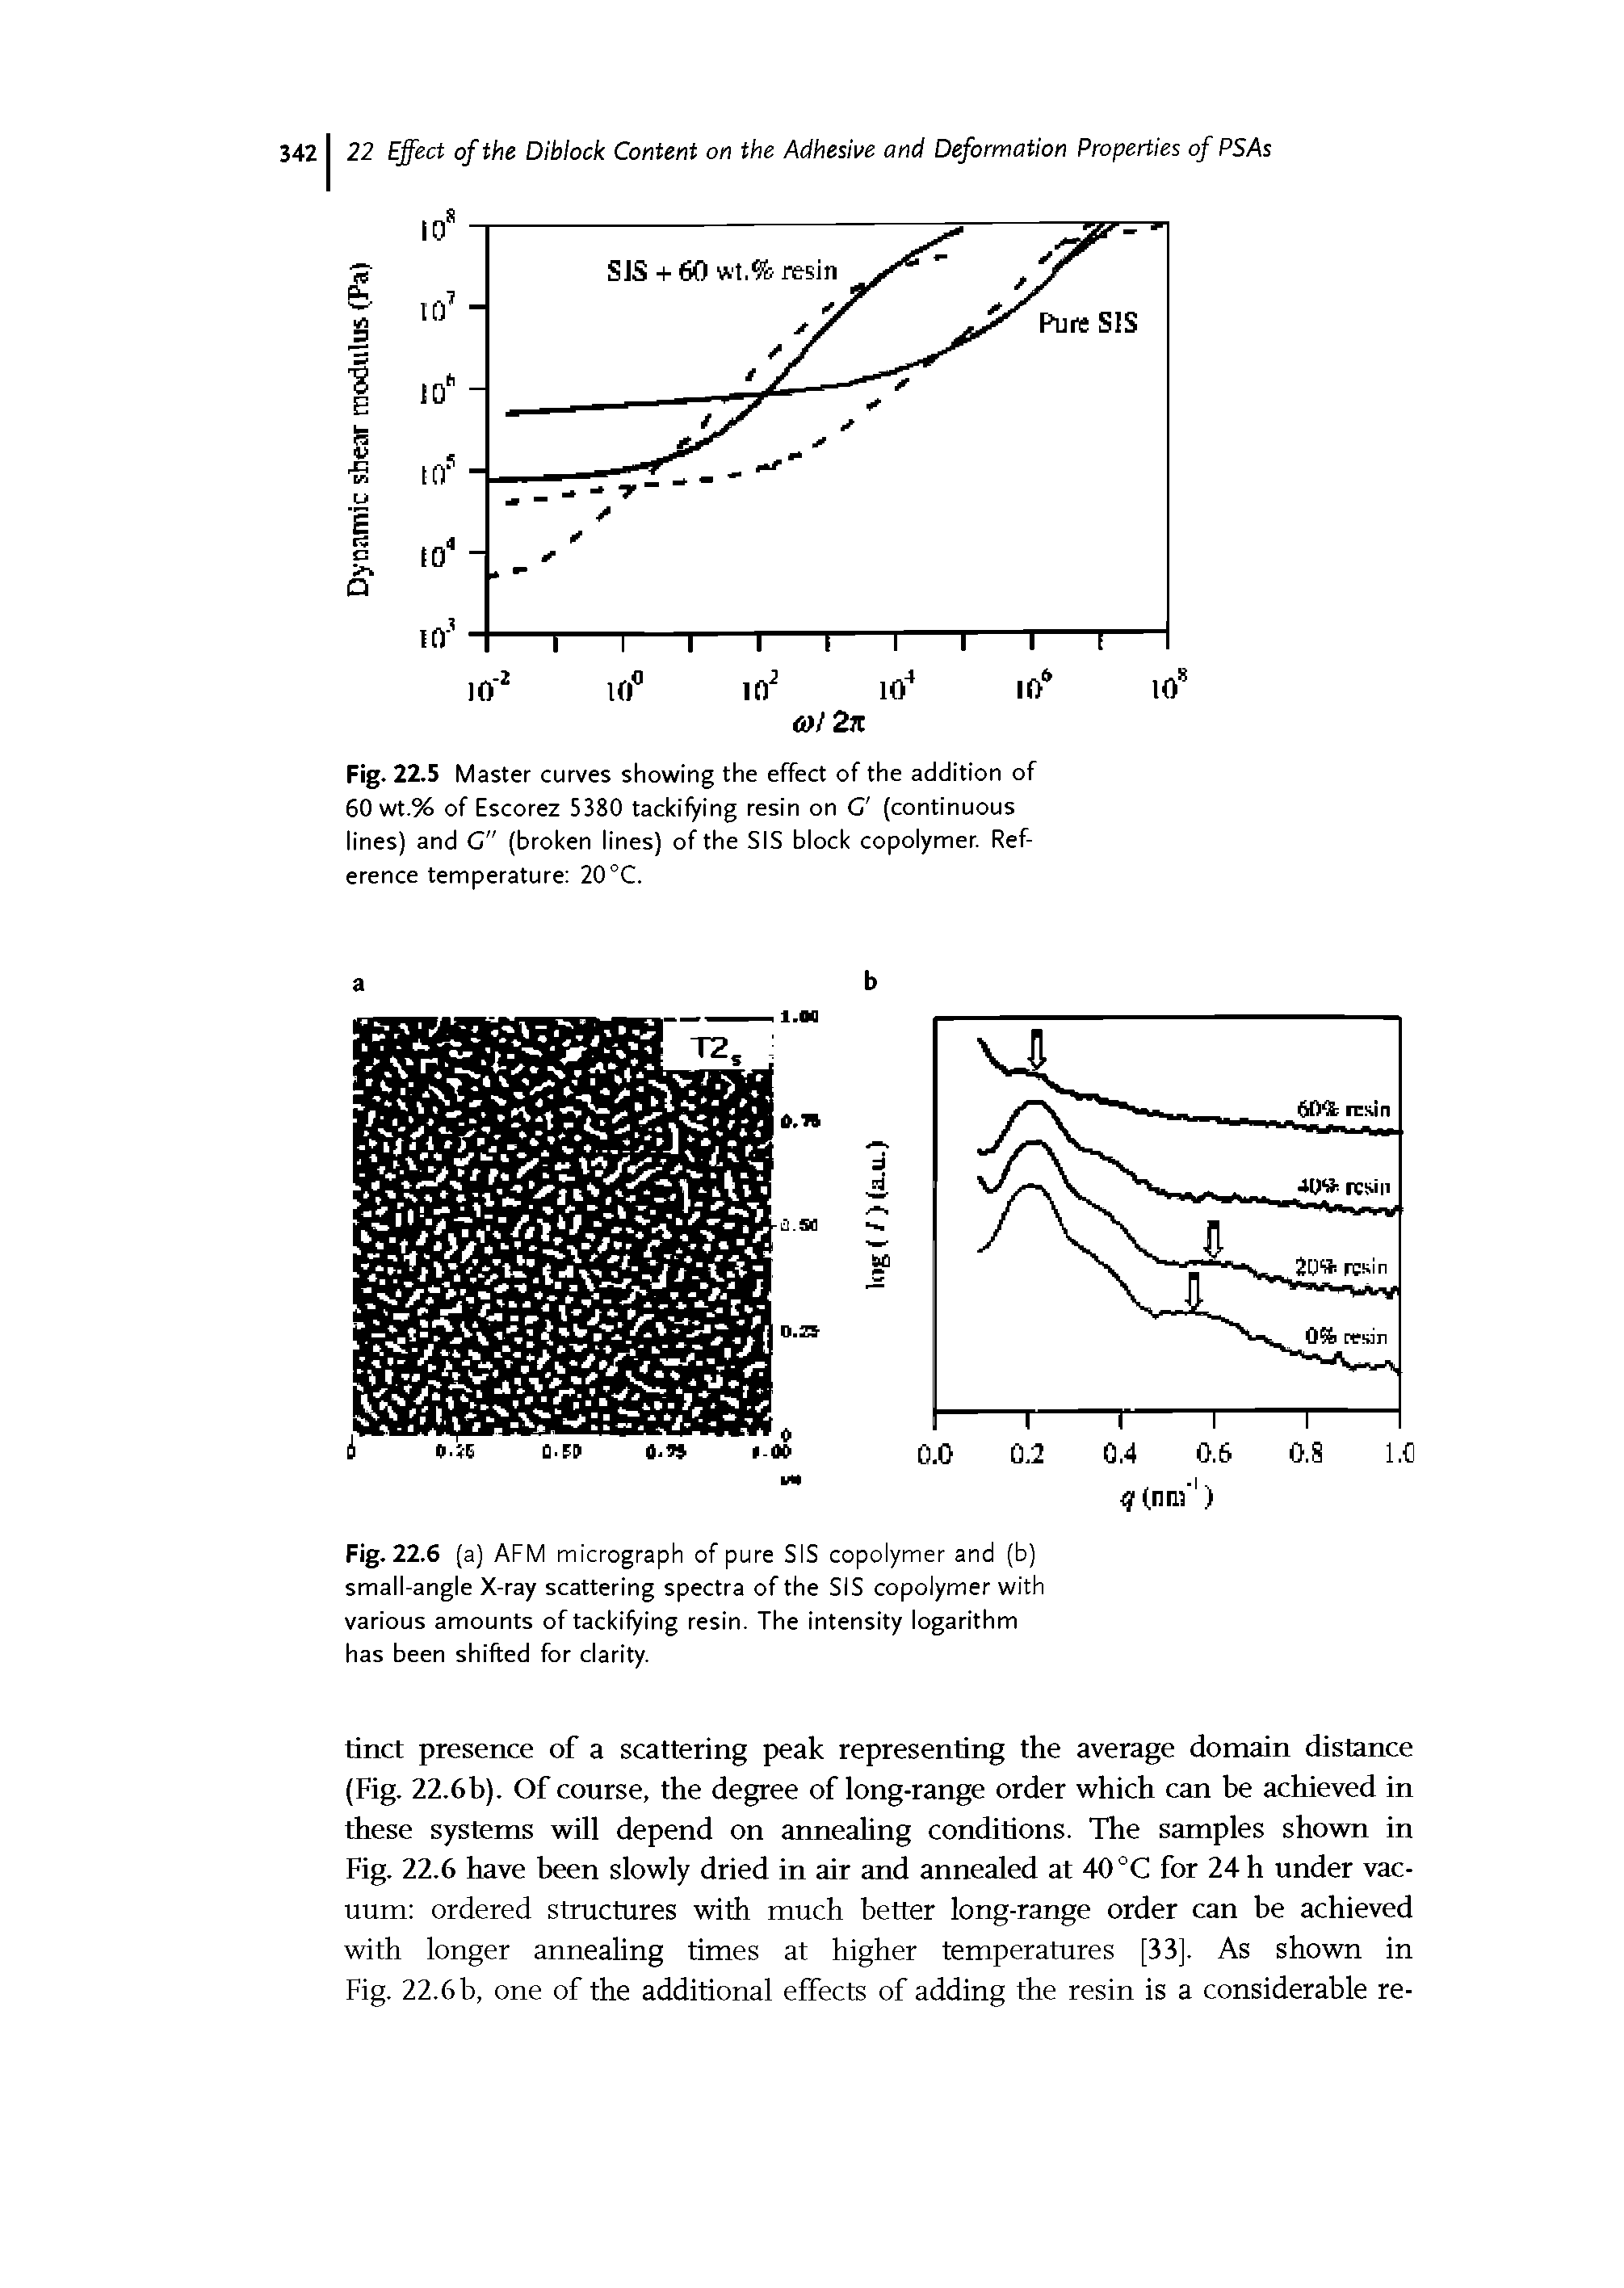 Fig. 22.5 Master curves showing the effect of the addition of 60 wt.% of Escorez 5380 tackifying resin on C (continuous iines) and C" (broken iines) of the SiS biock copoiymer. Reference temperature 20°C.